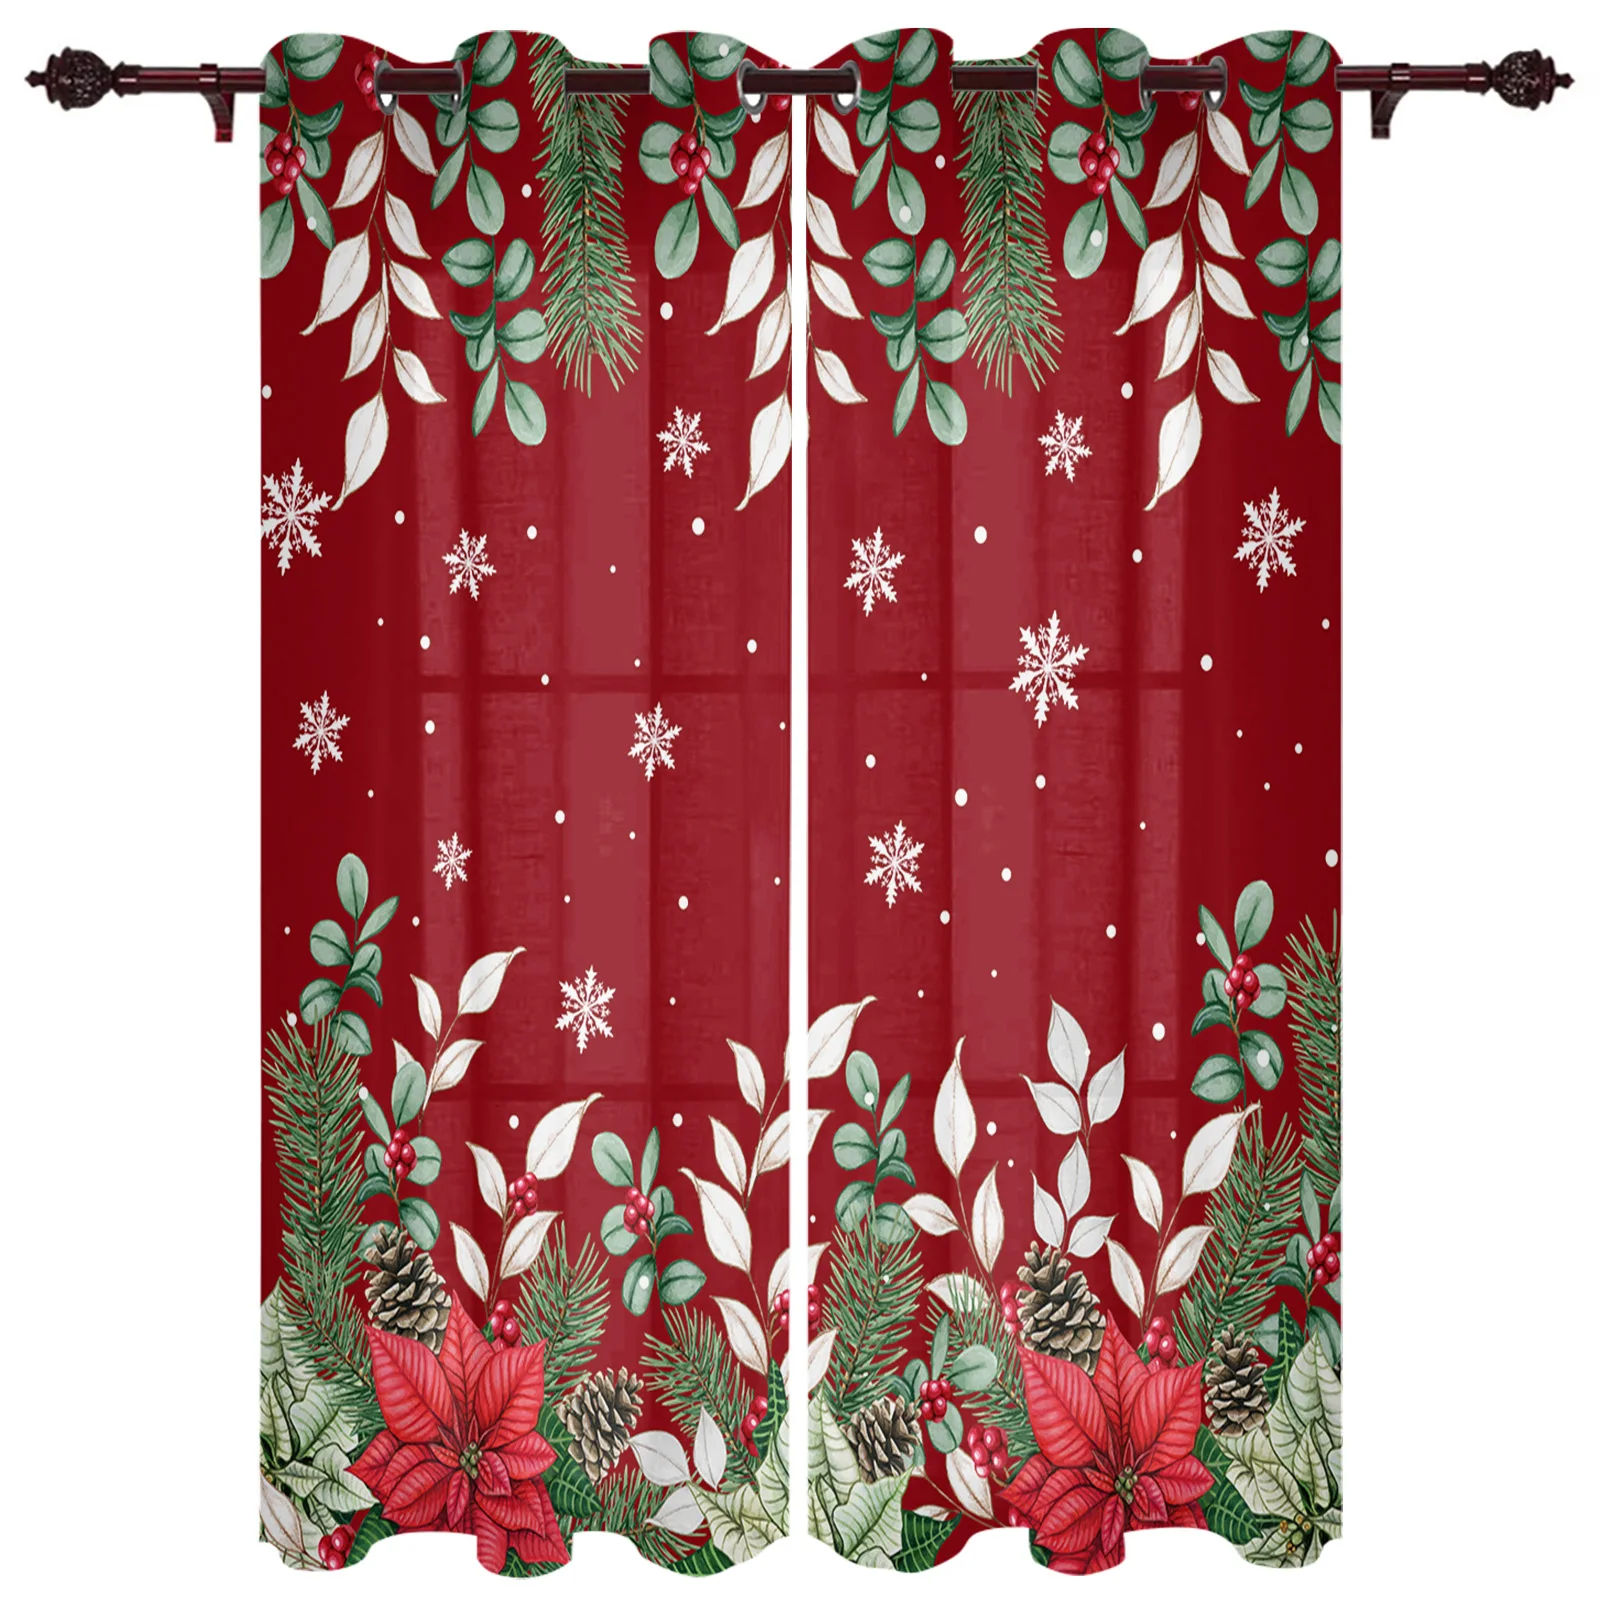 

Christmas Poinsettia Eucalyptus Berries Curtain for Living Room Bedroom Kitchen Curtains Home Decor Window Treatments Drapes